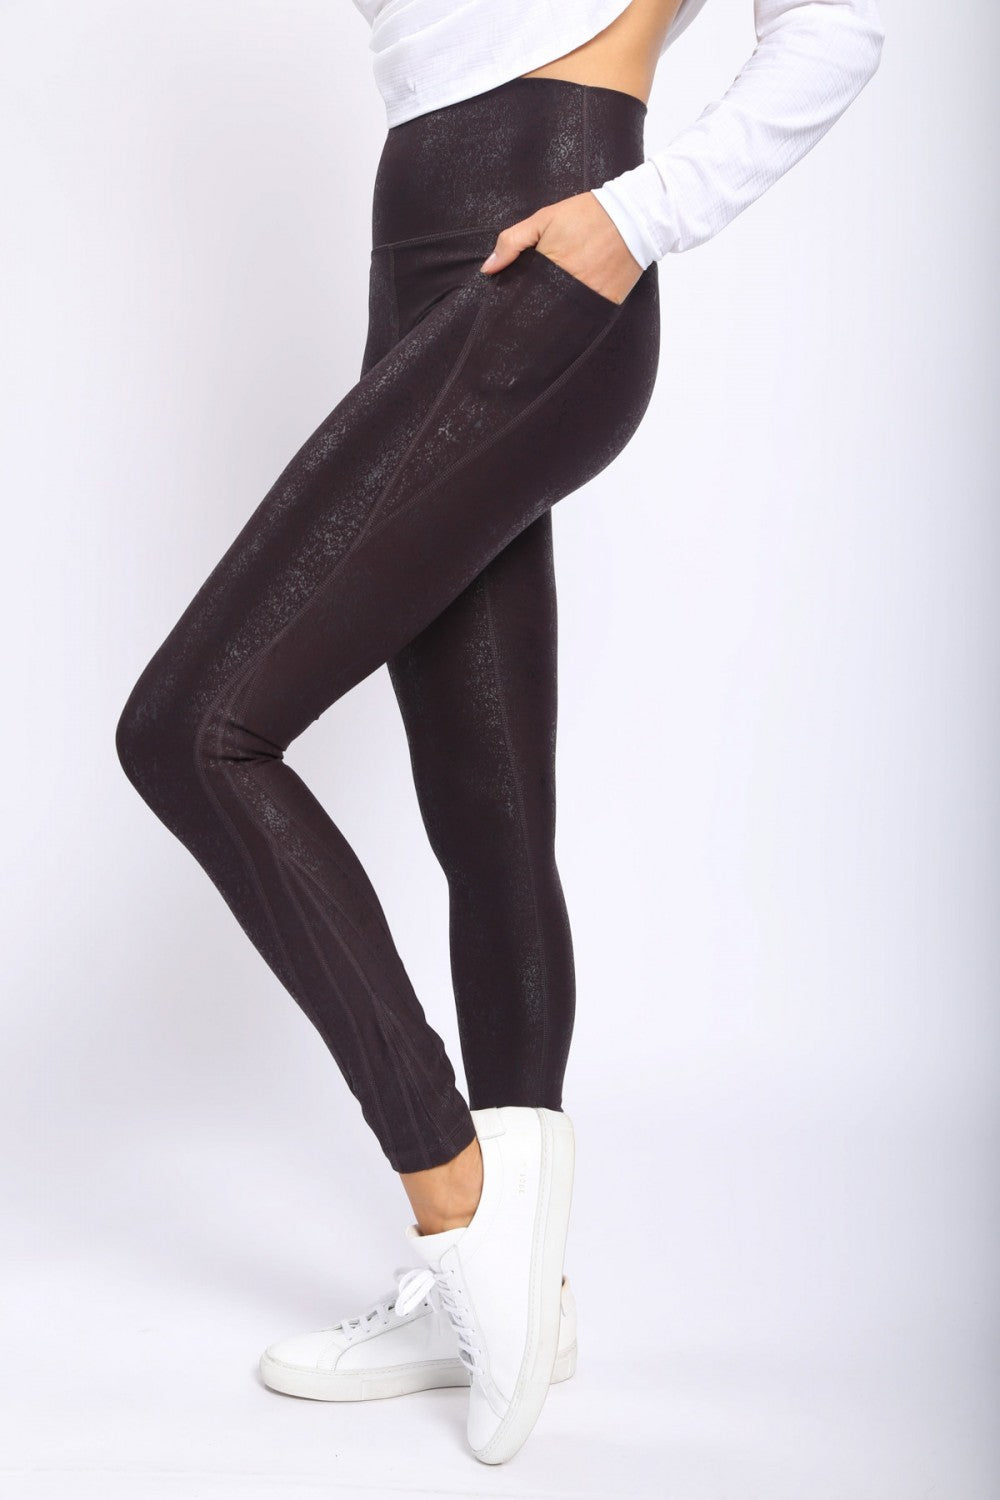 Highwaisted Foil Leggings With Side Pockets - Chocolate – swa-mee